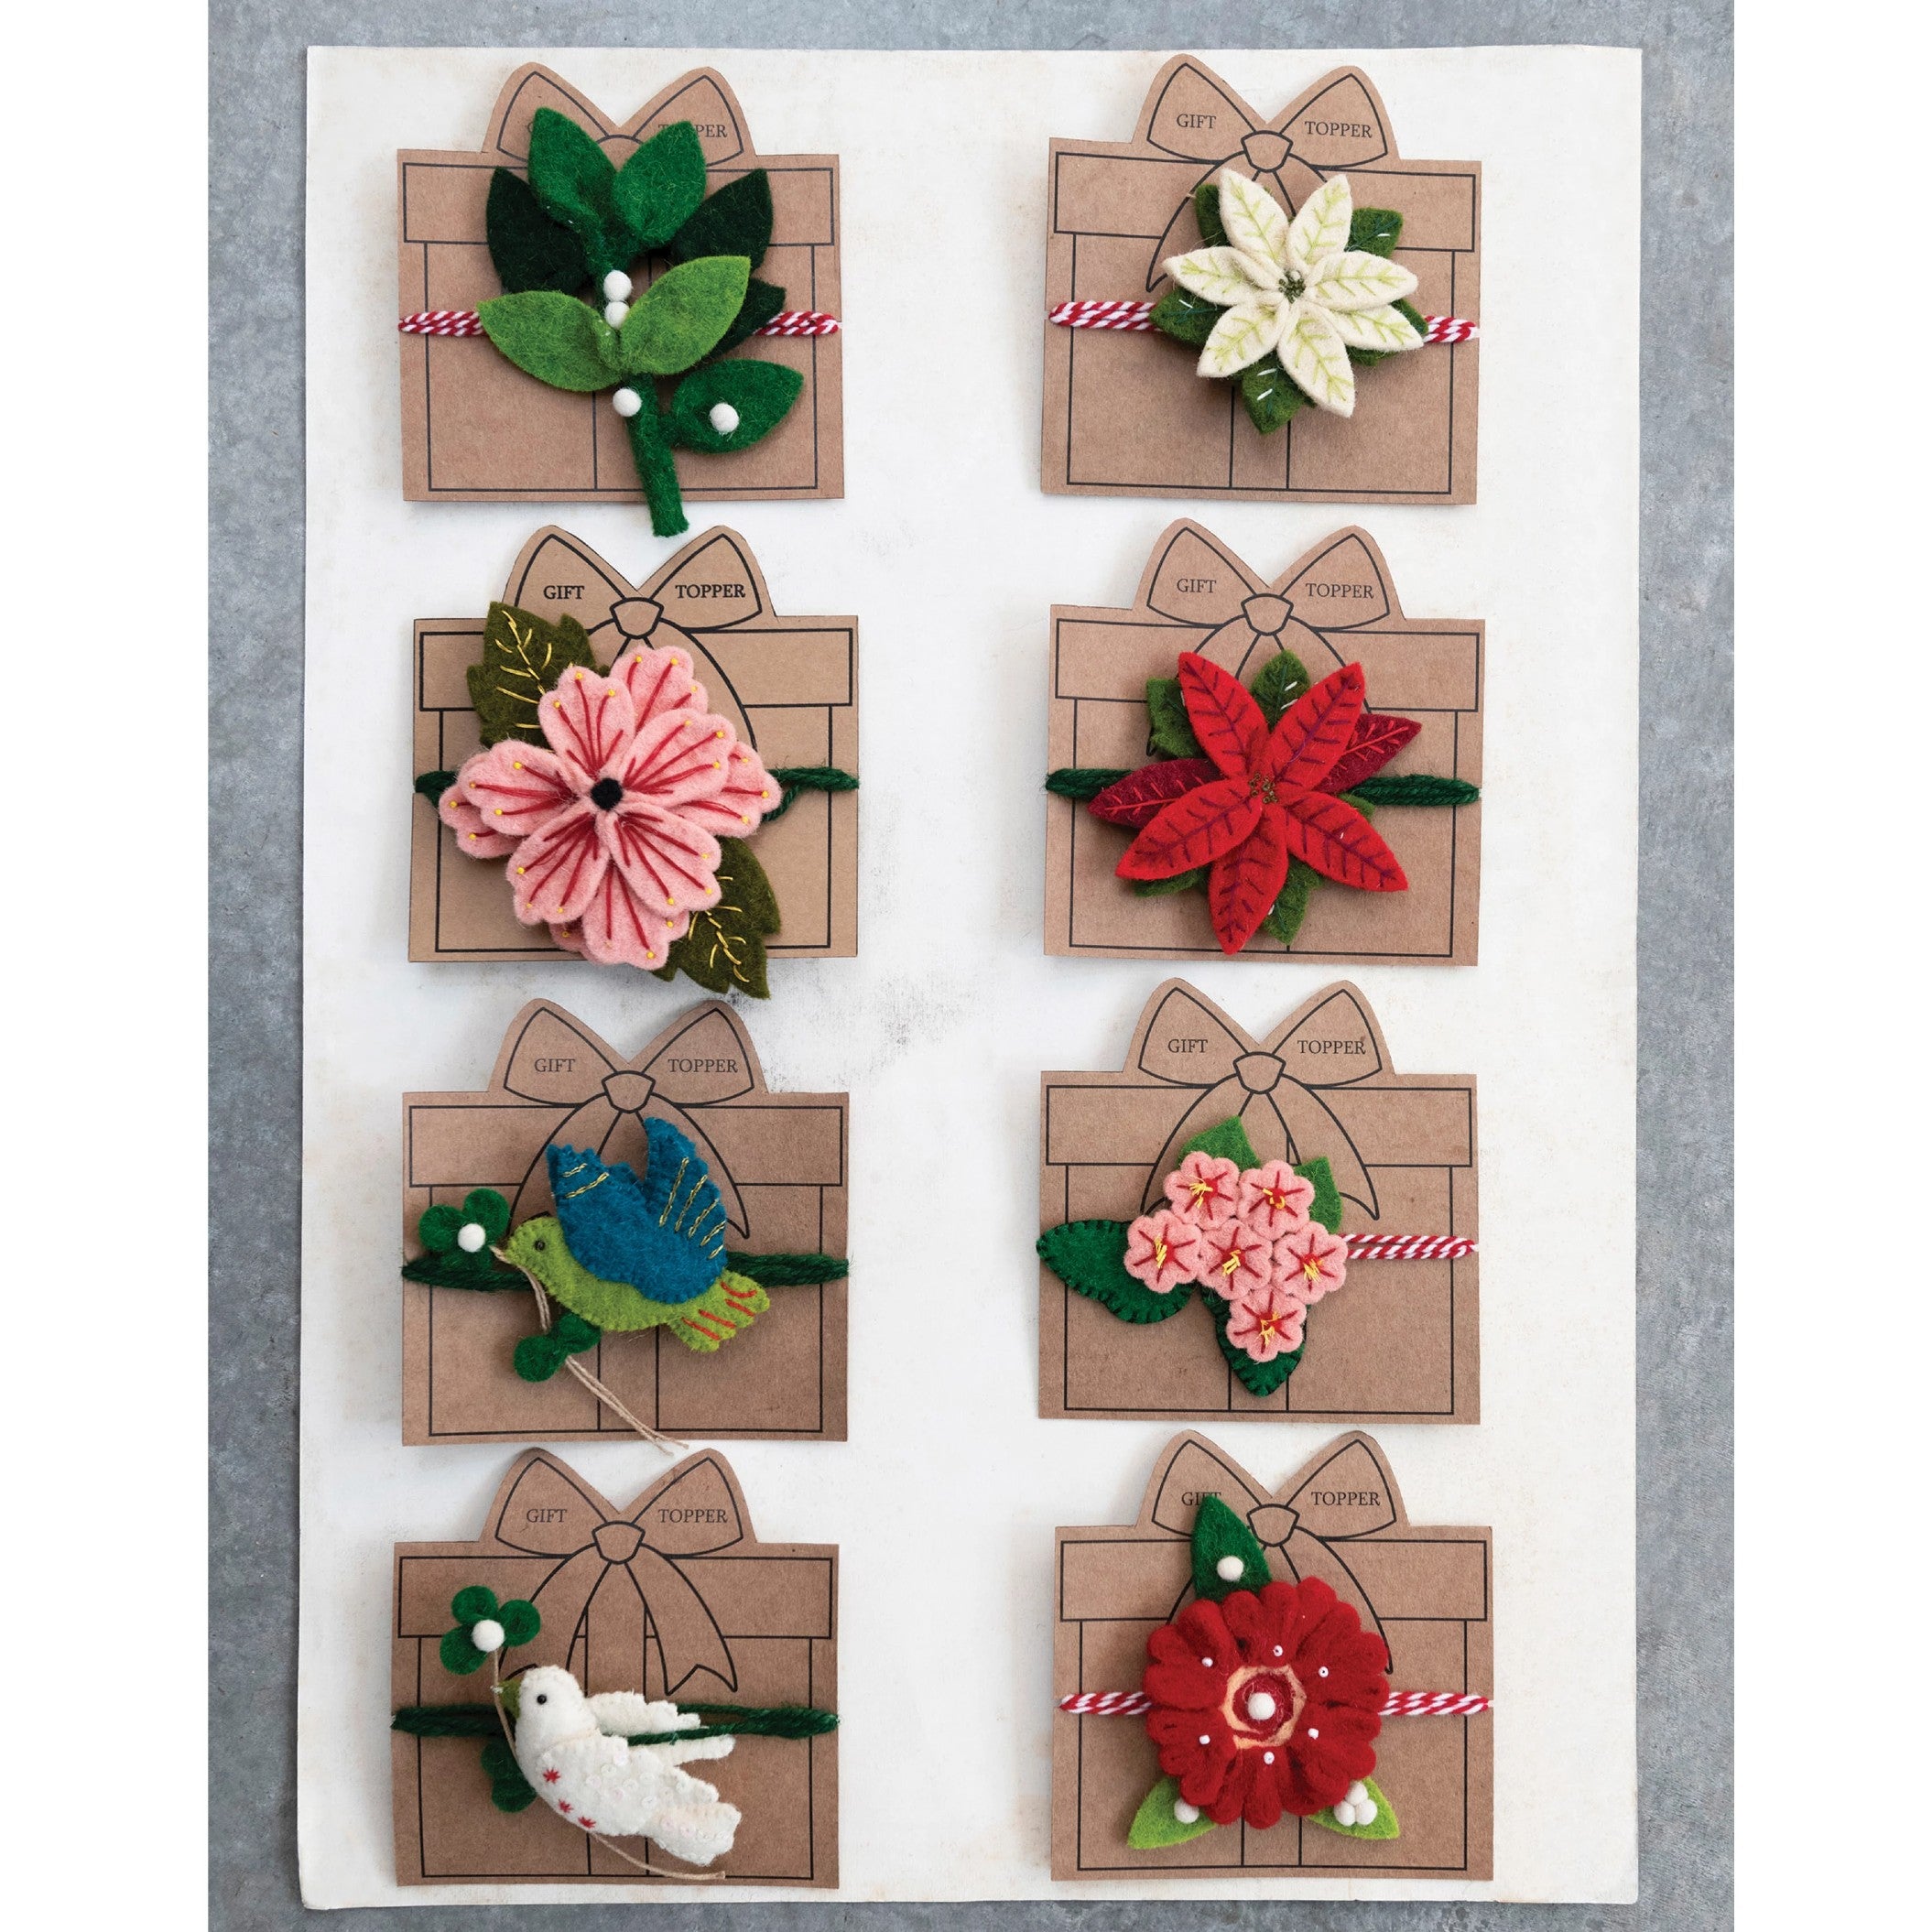 Wool Felt Gift Toppers